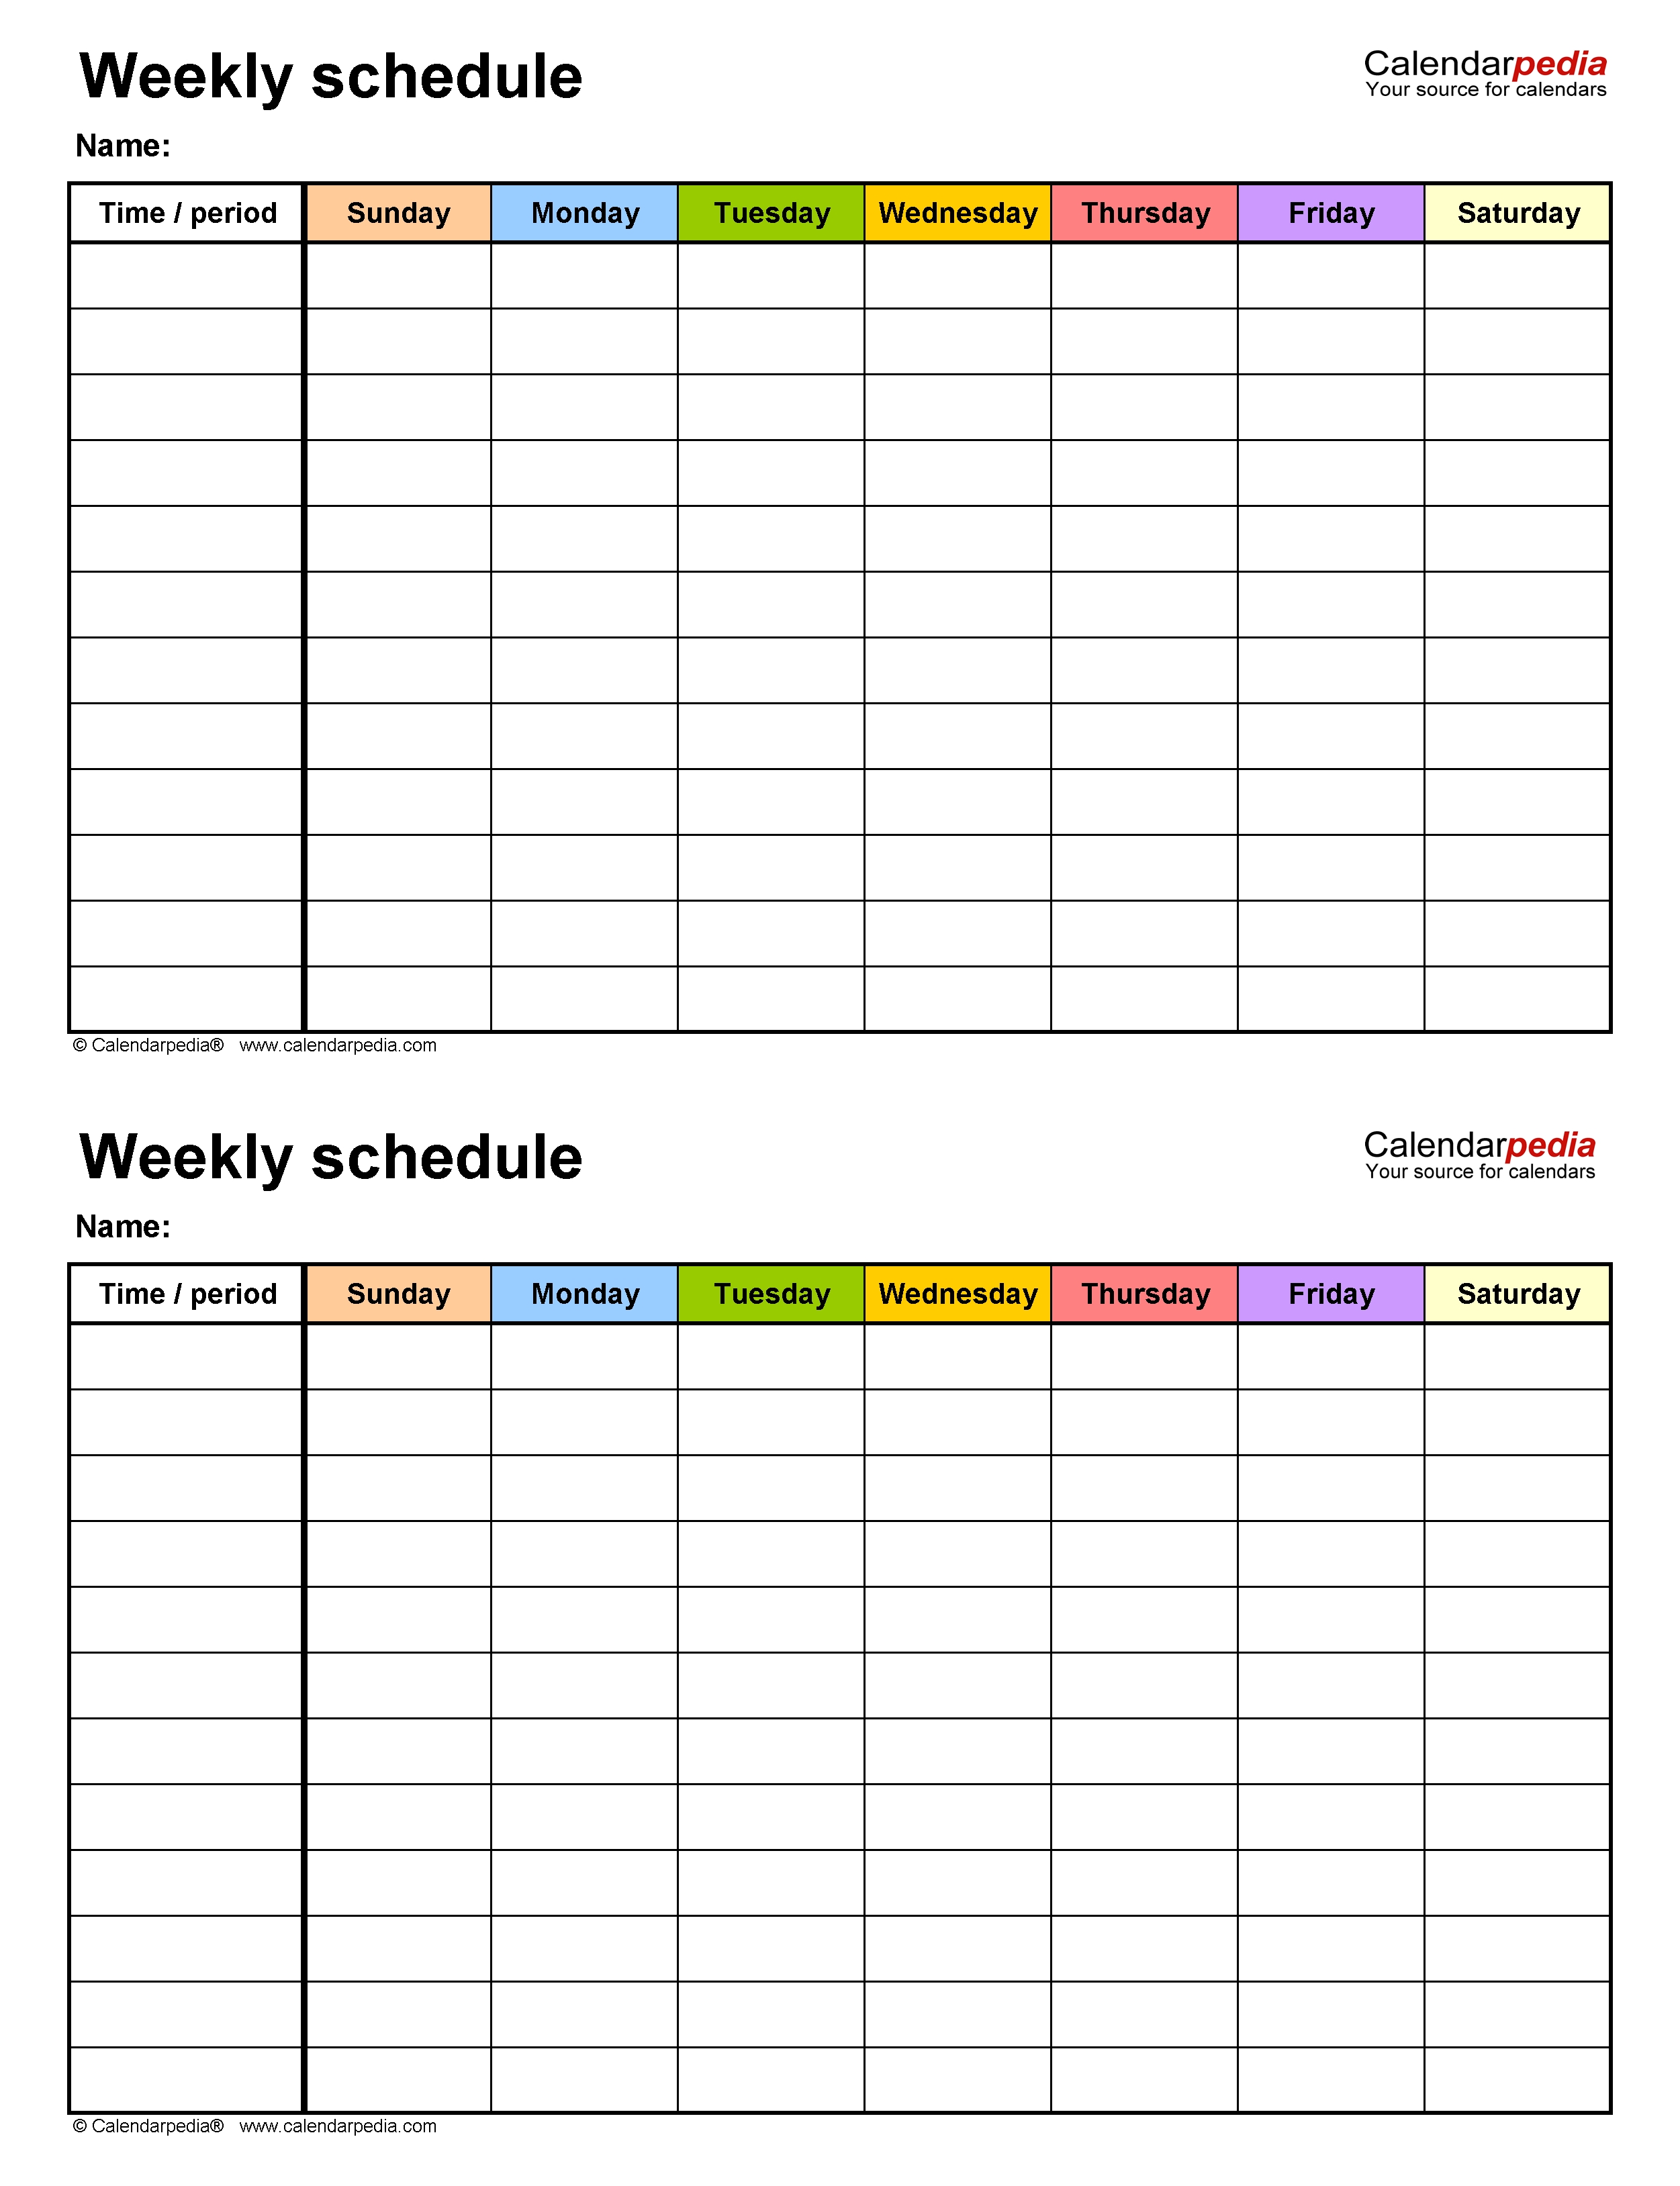 Free Weekly Schedule Templates For Word - 18 Templates with regard to One Week Calendar With Hours